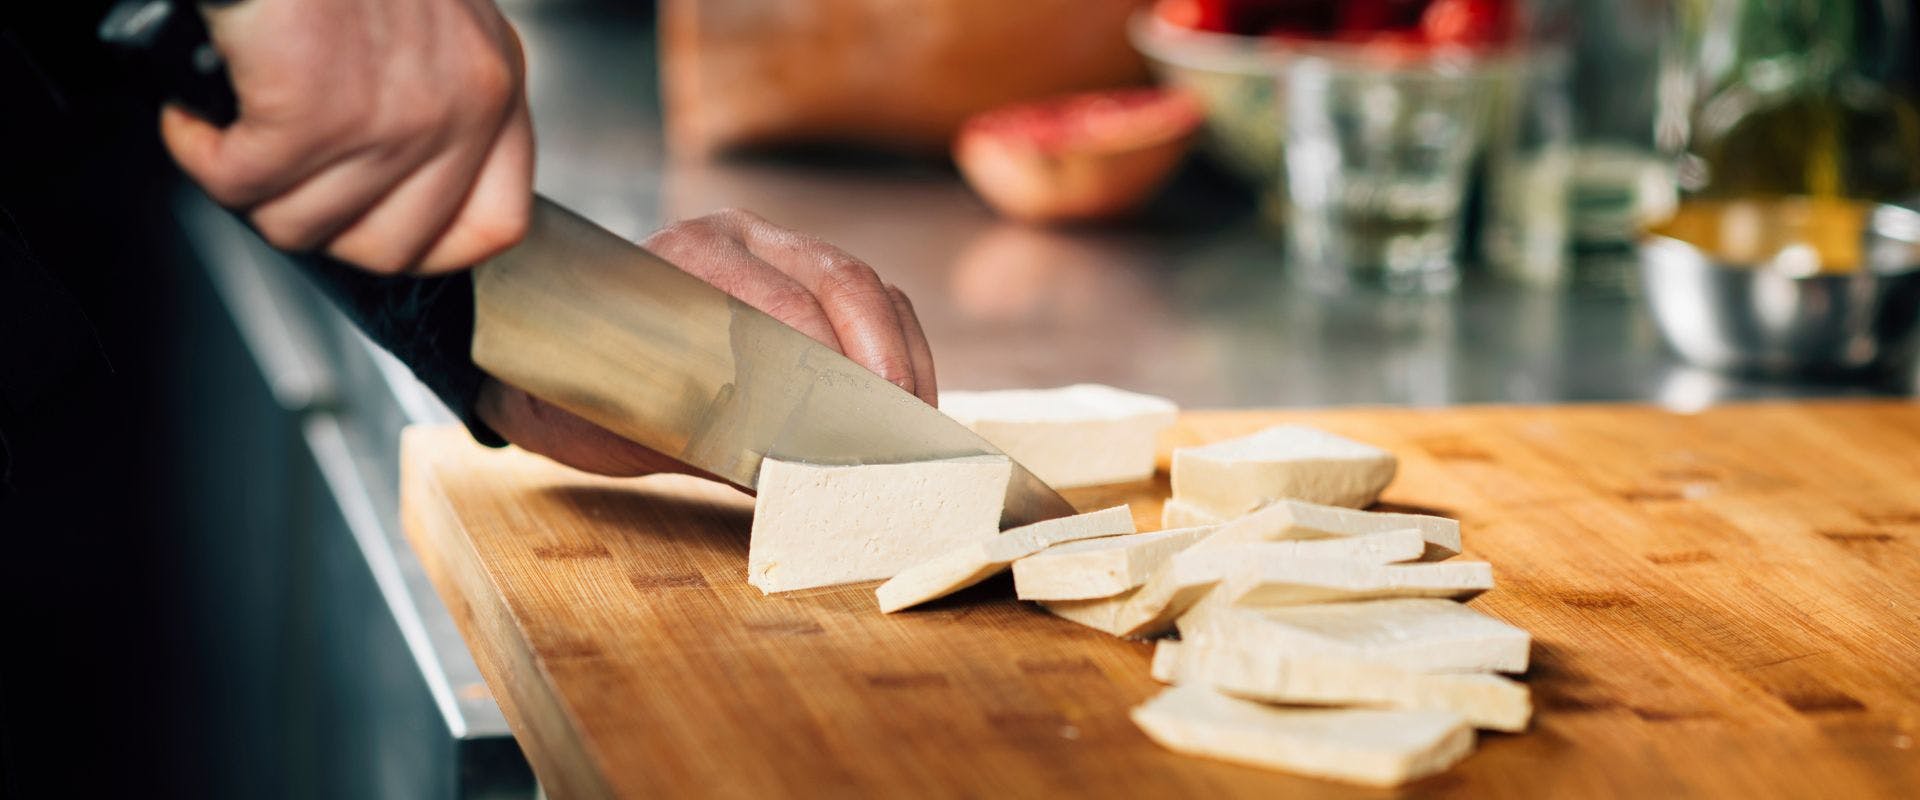 Tofu being sliced on a wooden chopping board